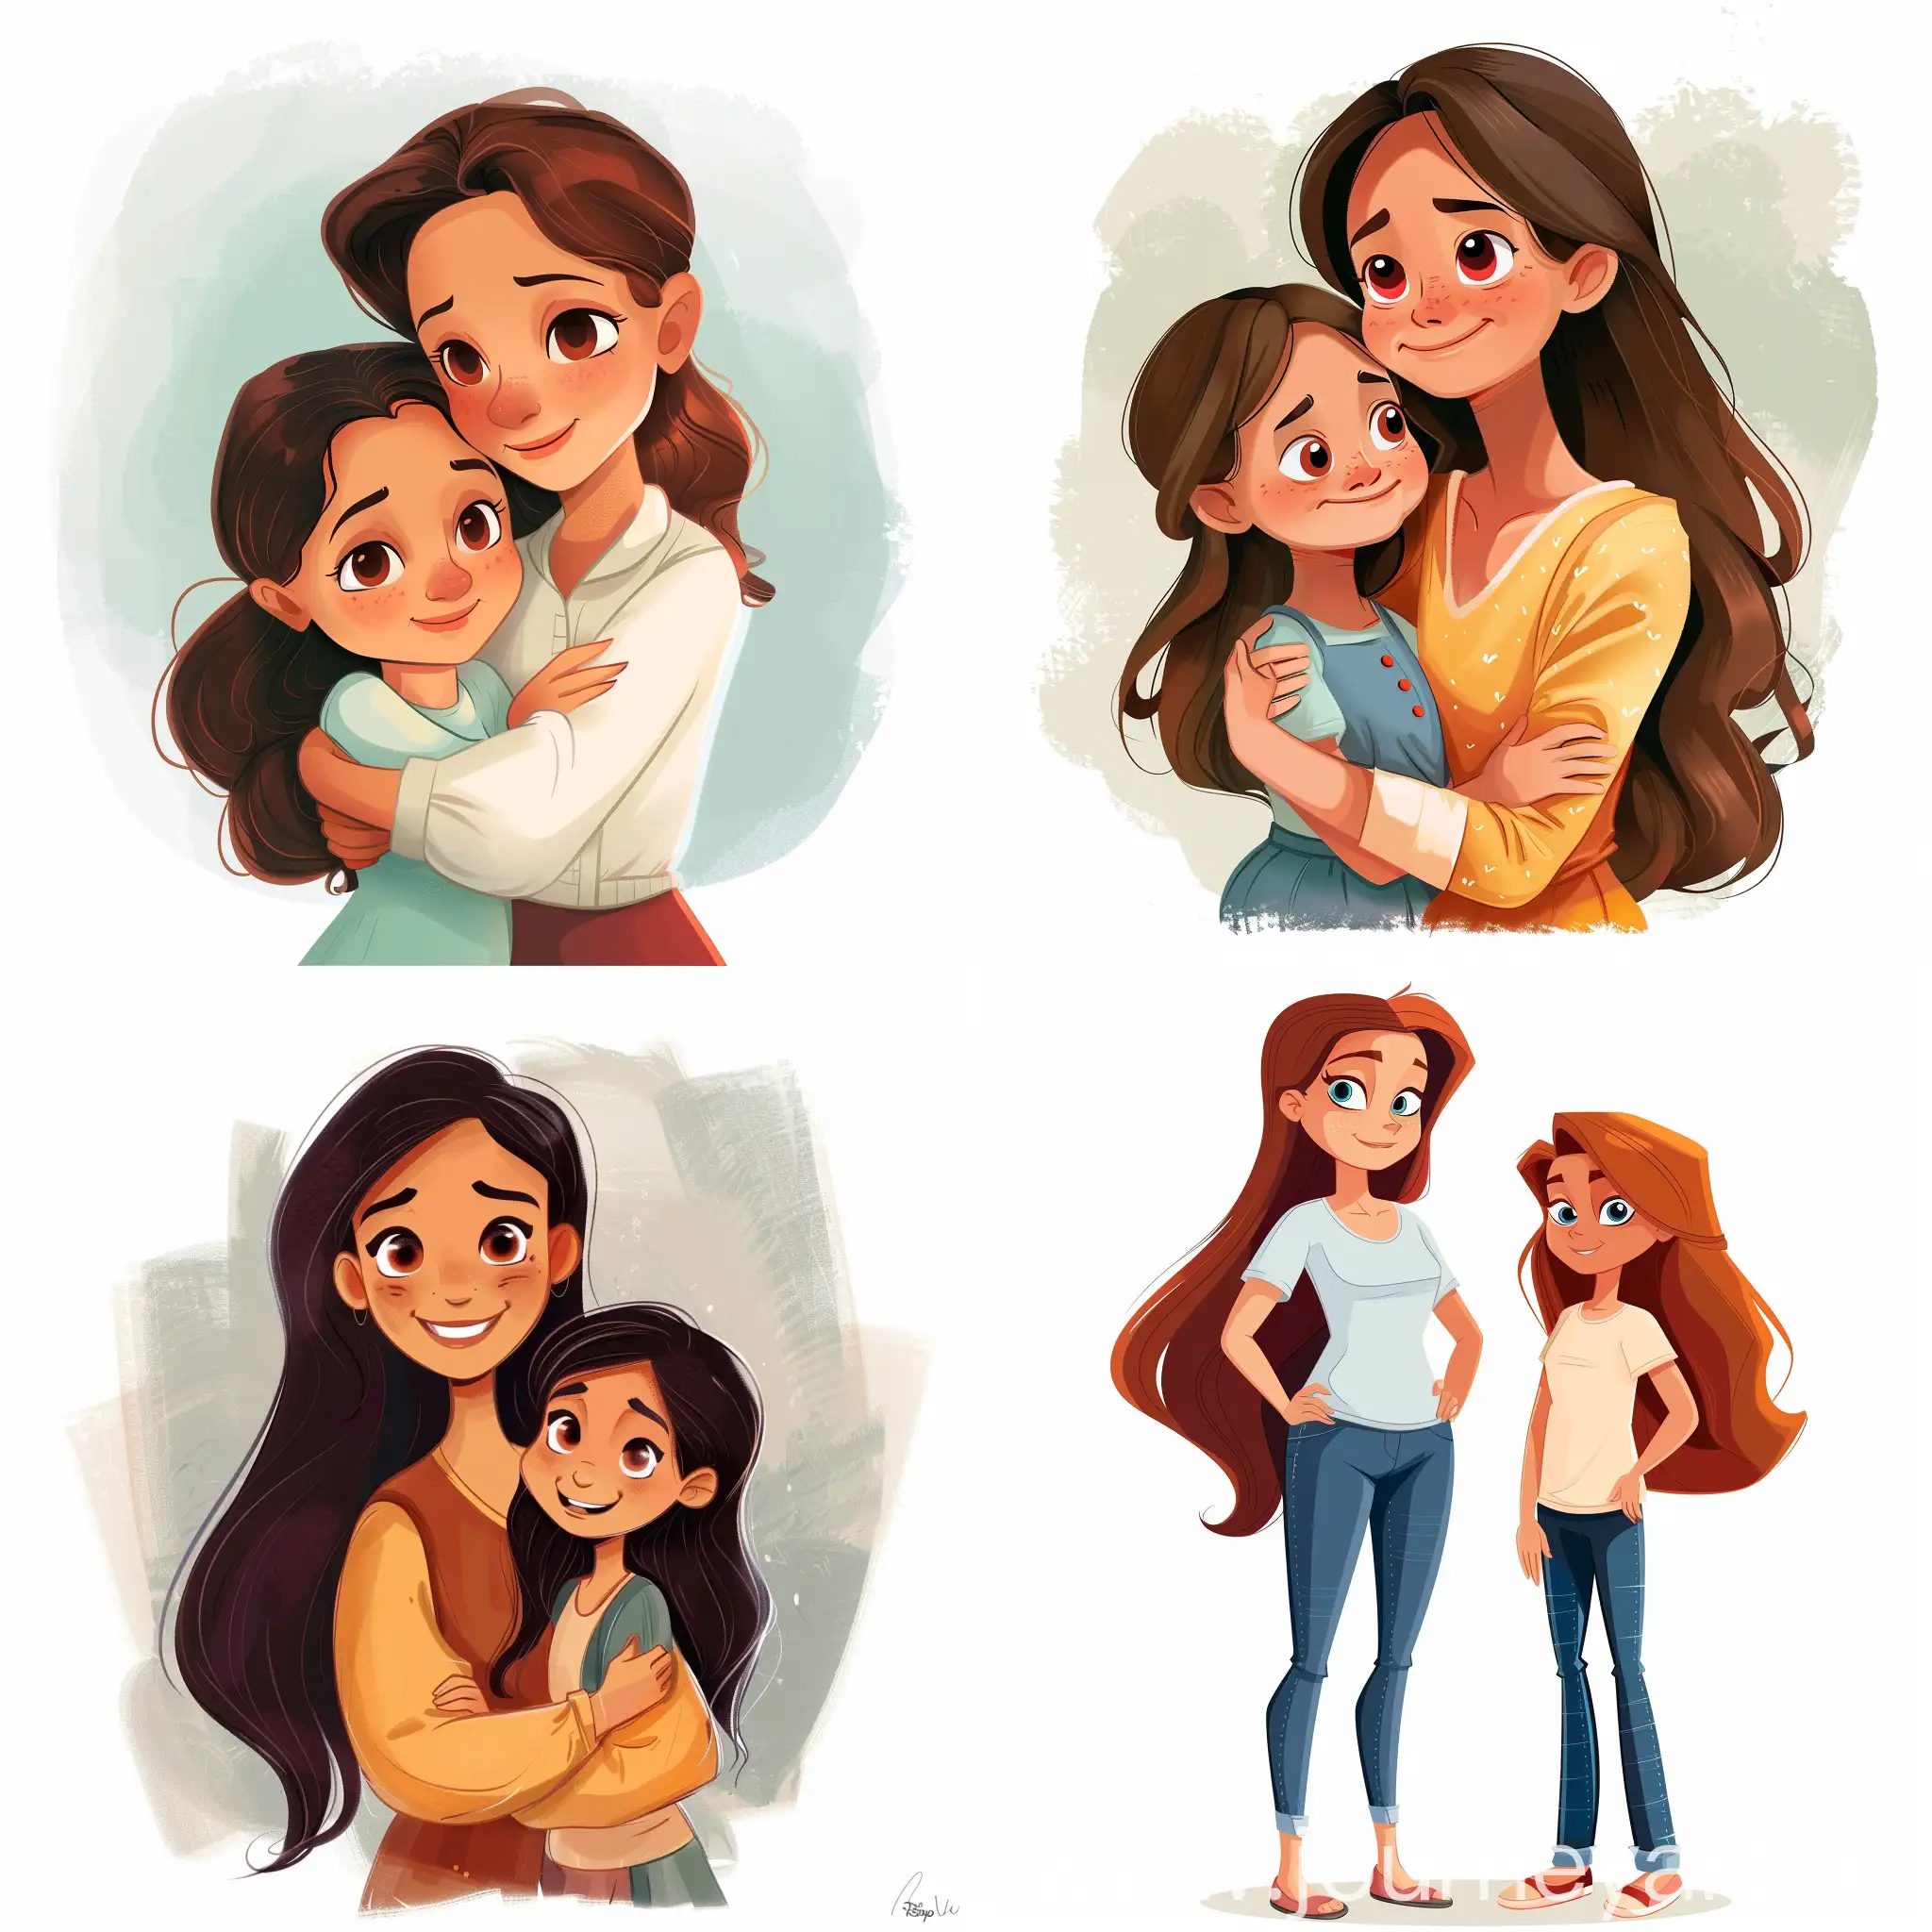 Disney-Style-Cartoon-Illustration-of-Mother-and-Daughter